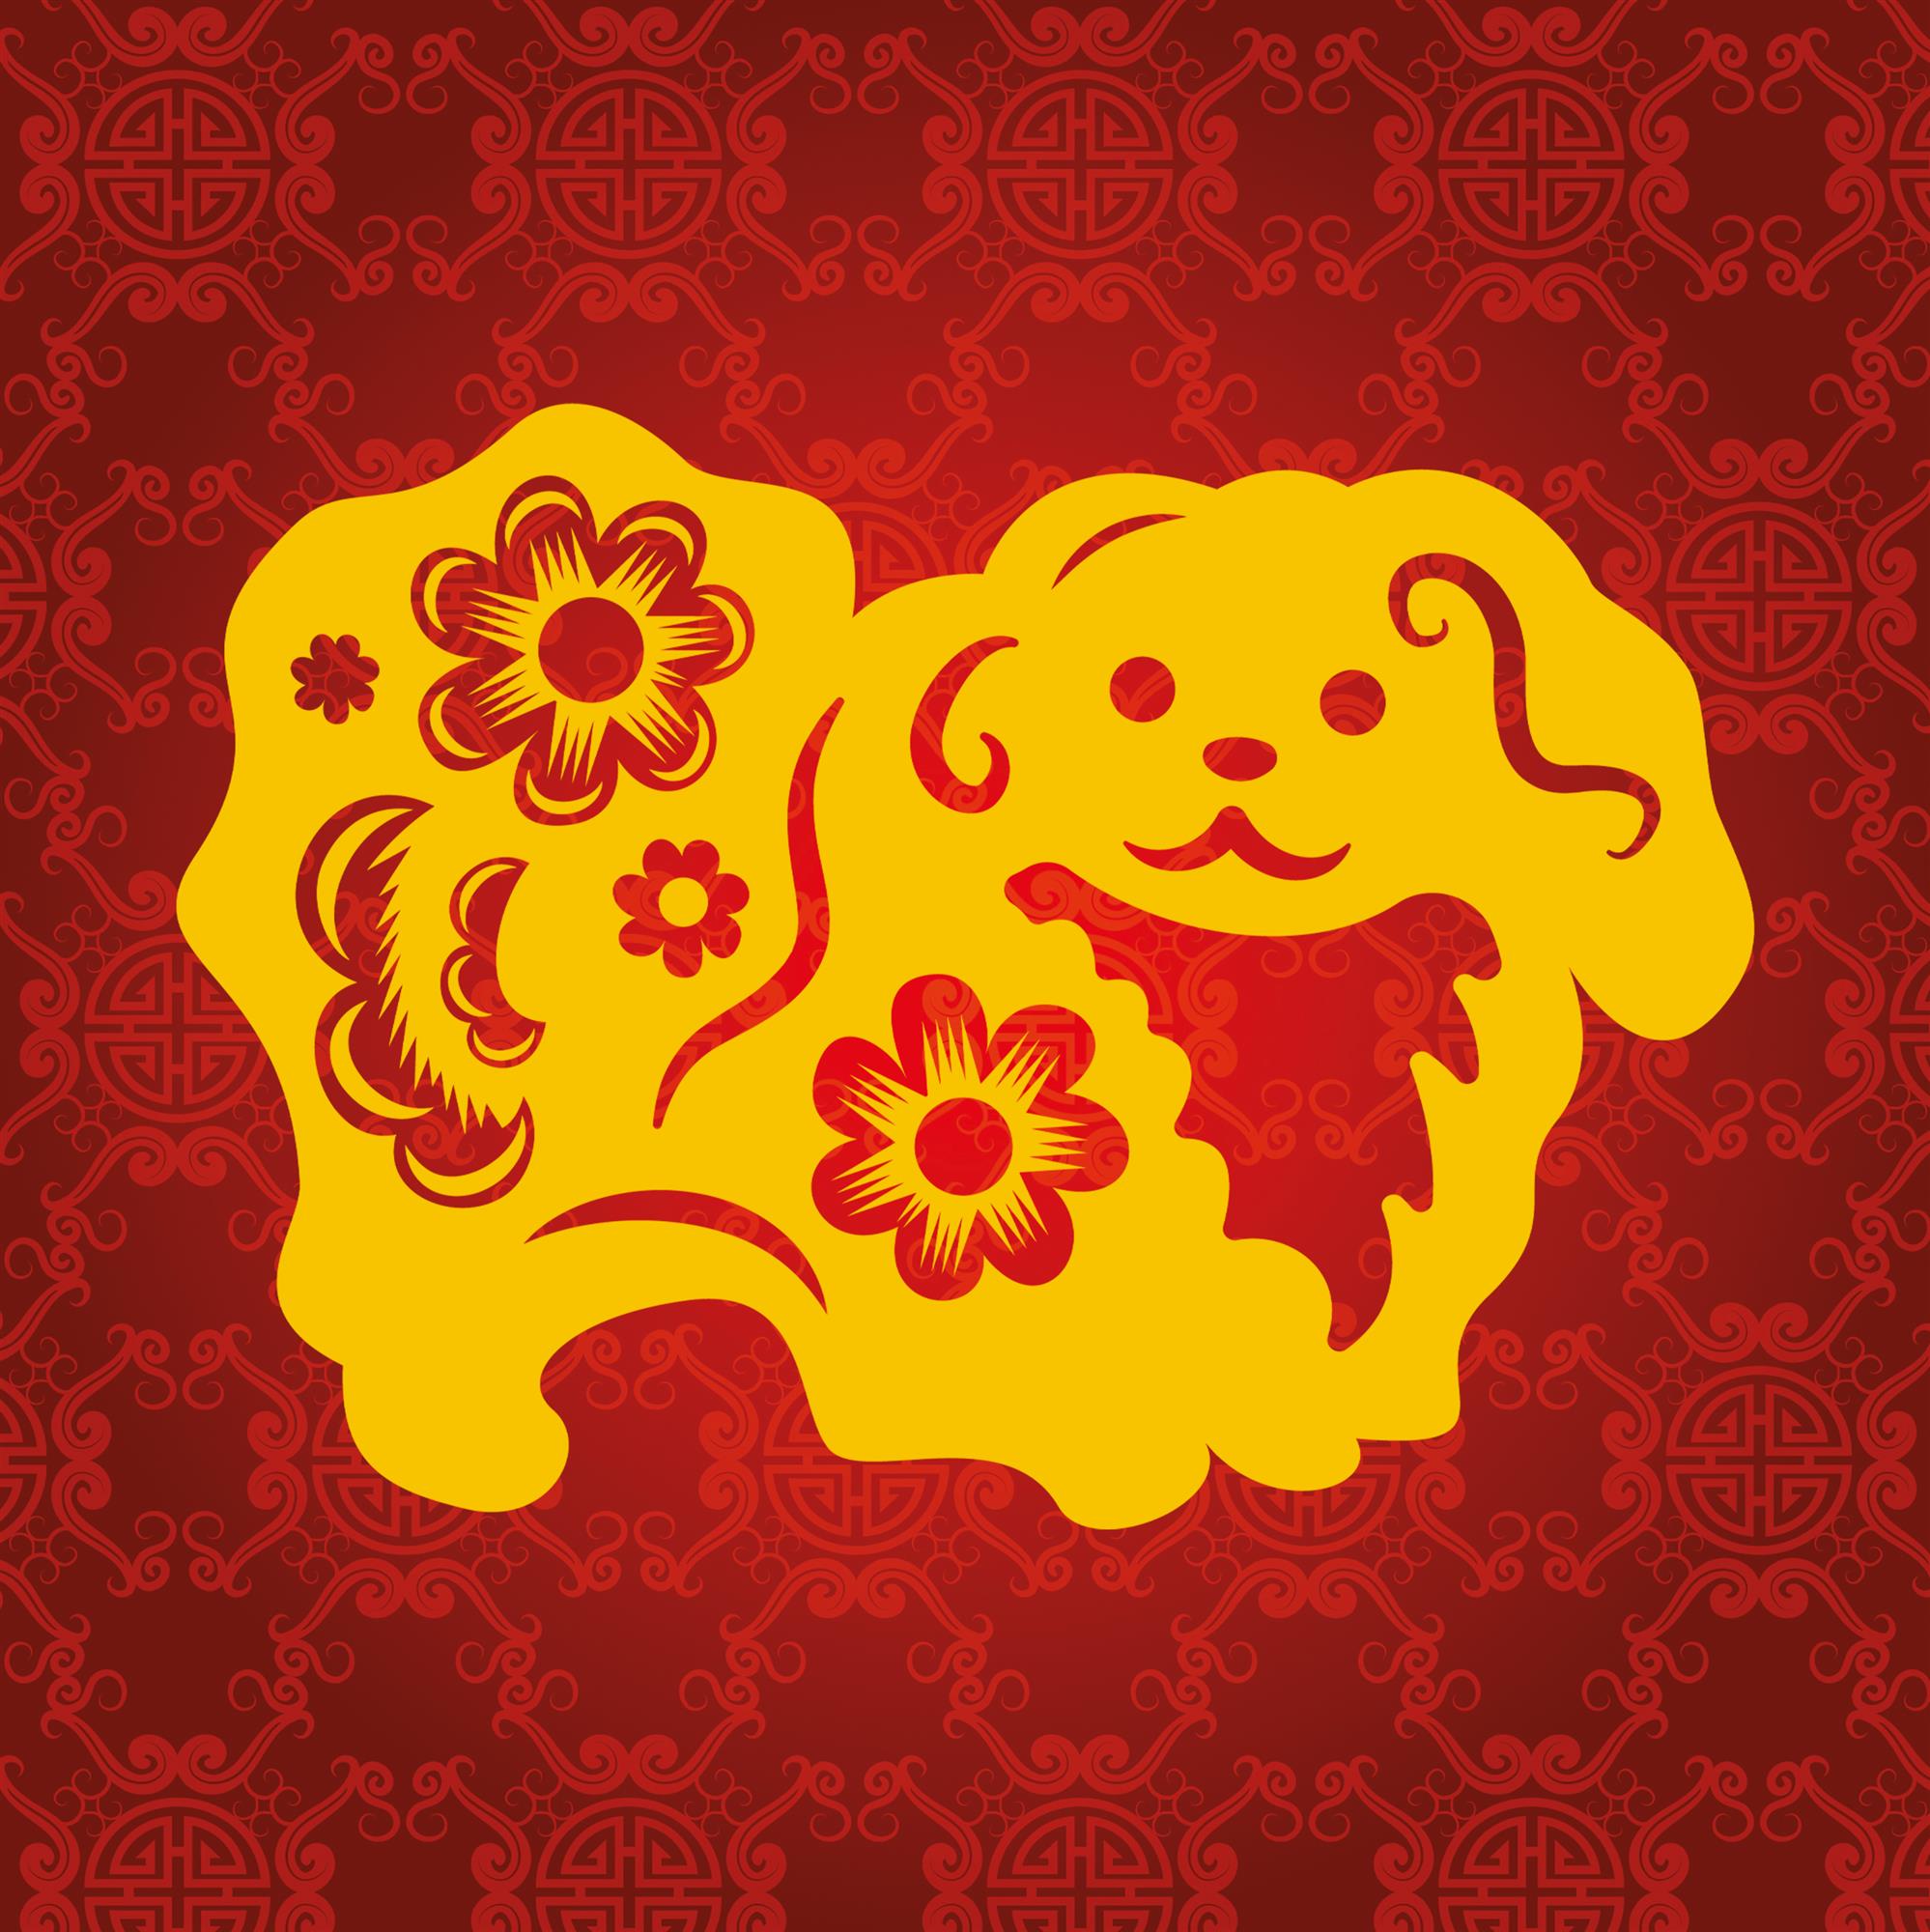 Red and yellow Chinese style illustration of a dog